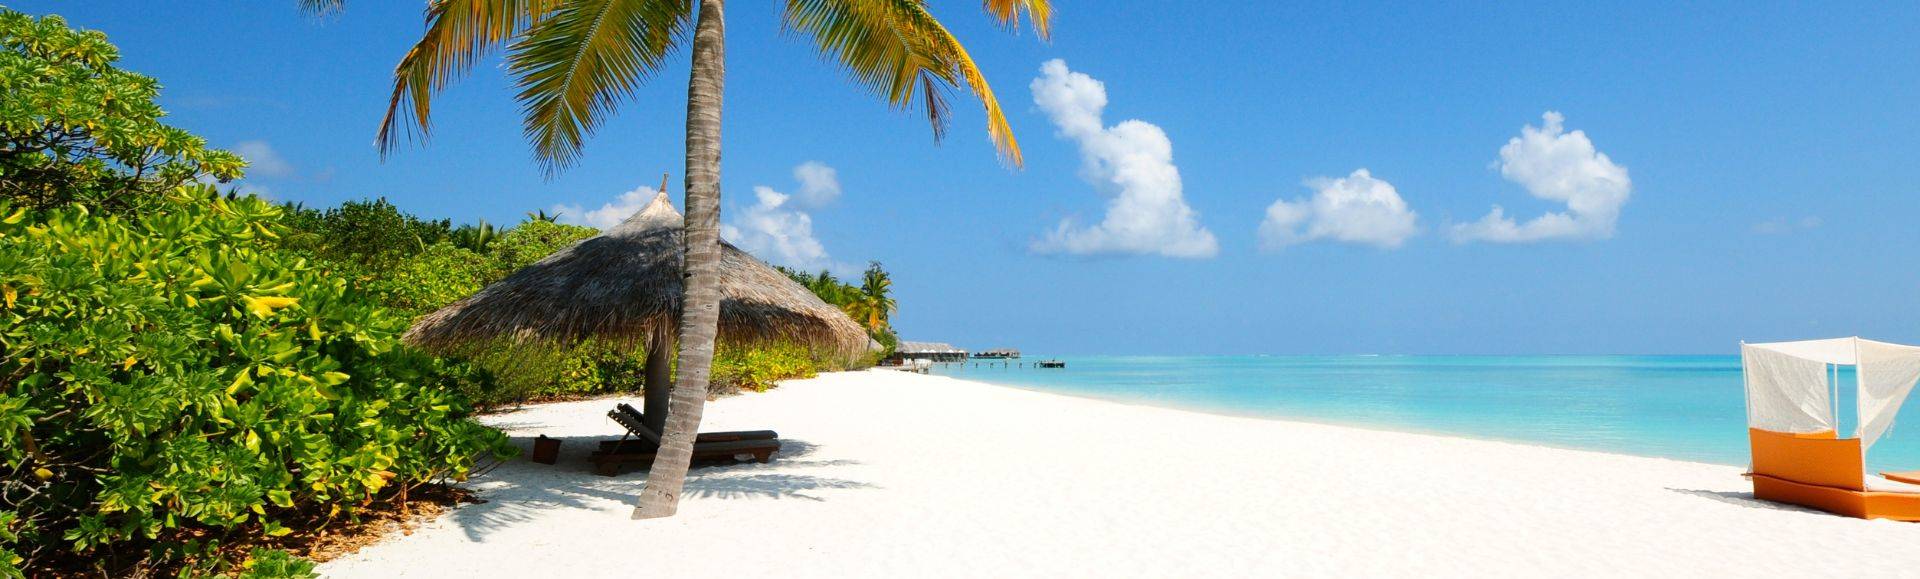 Tropical beach with palms and white sand - winter break